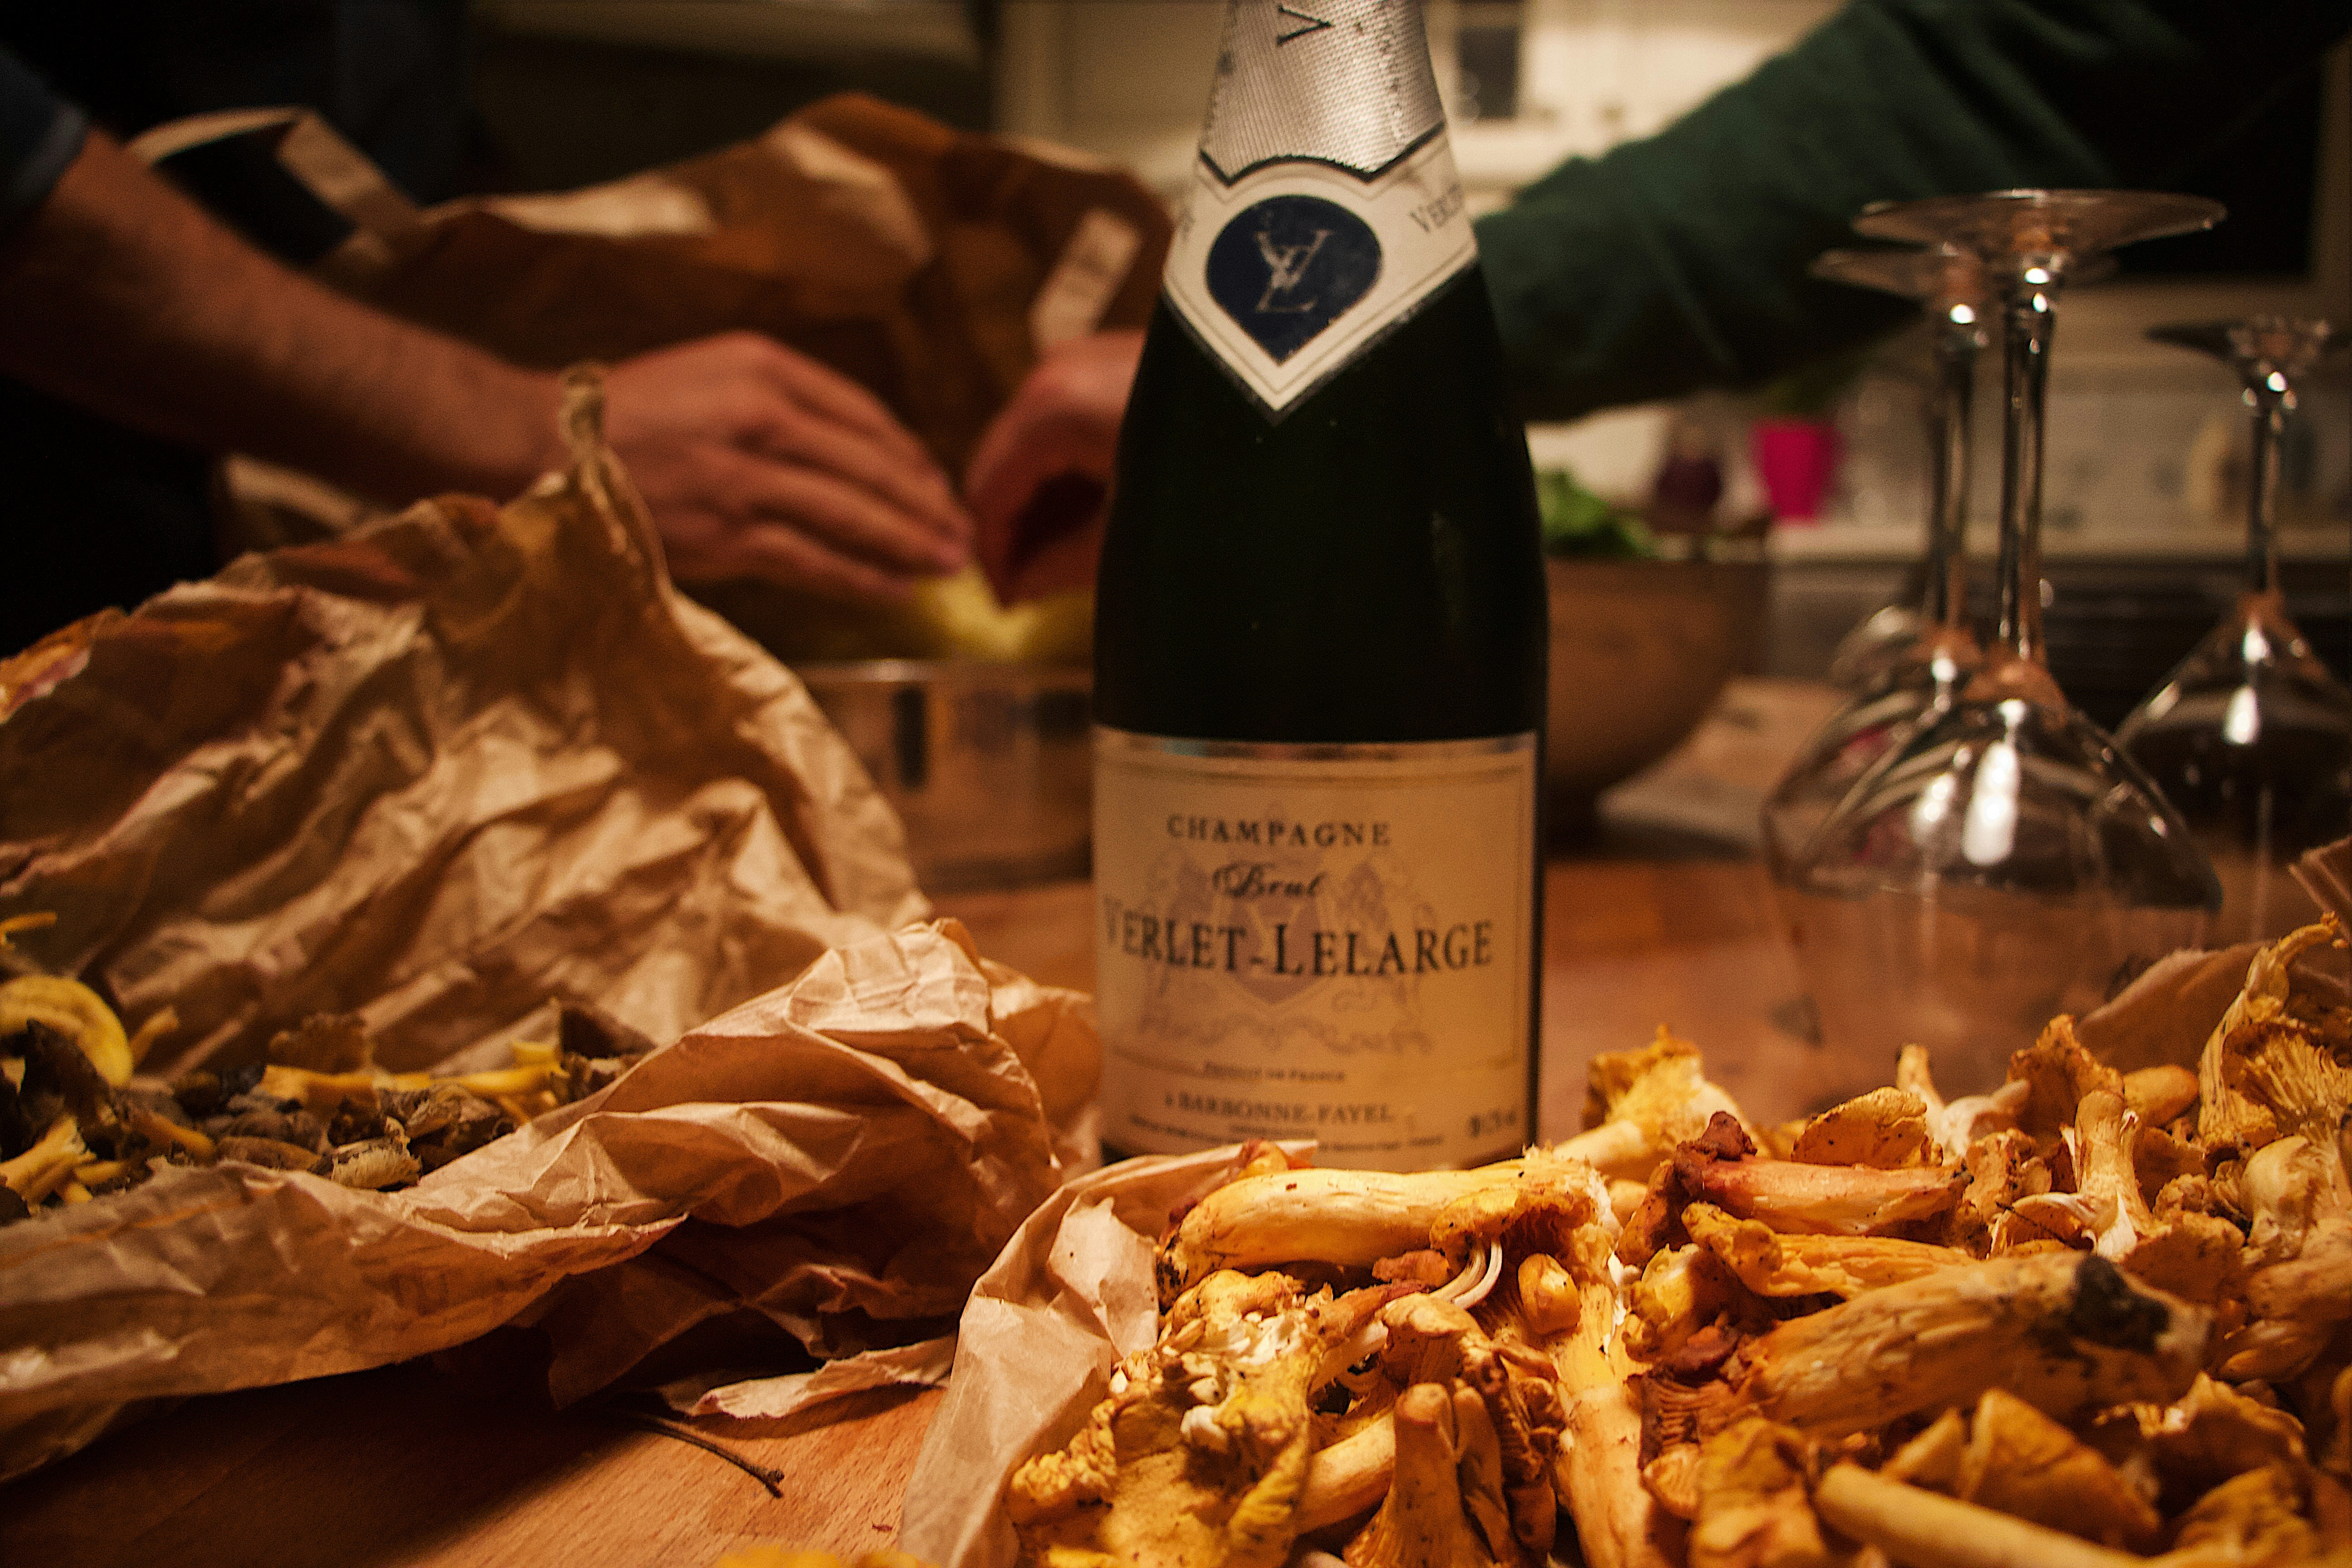 wine bottle in the middle of a wooden table with chips